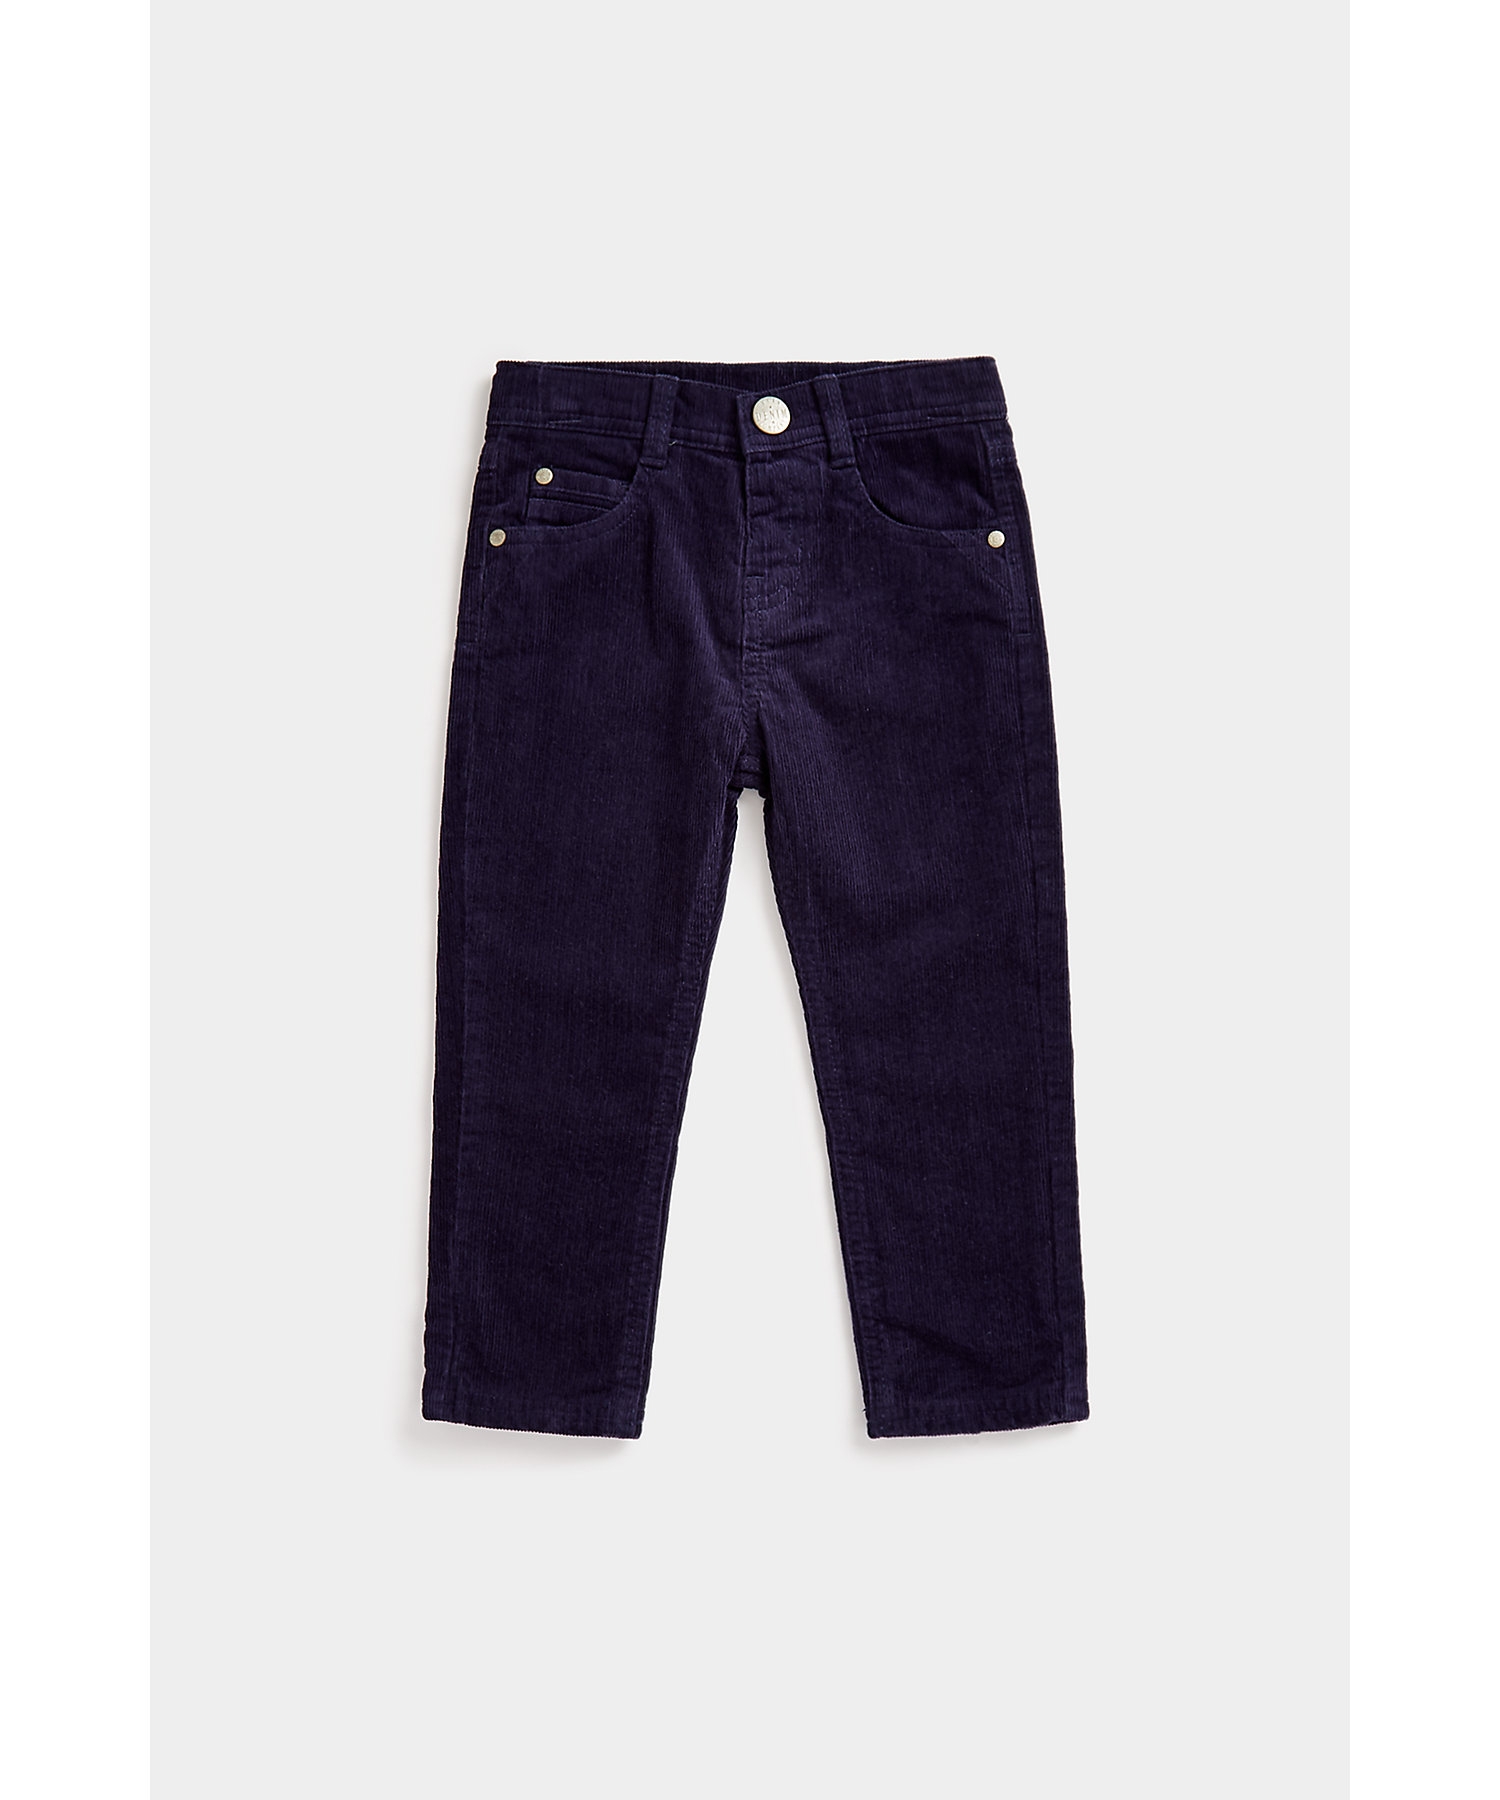 Mothercare | Boys Corduroy Trousers -Navy